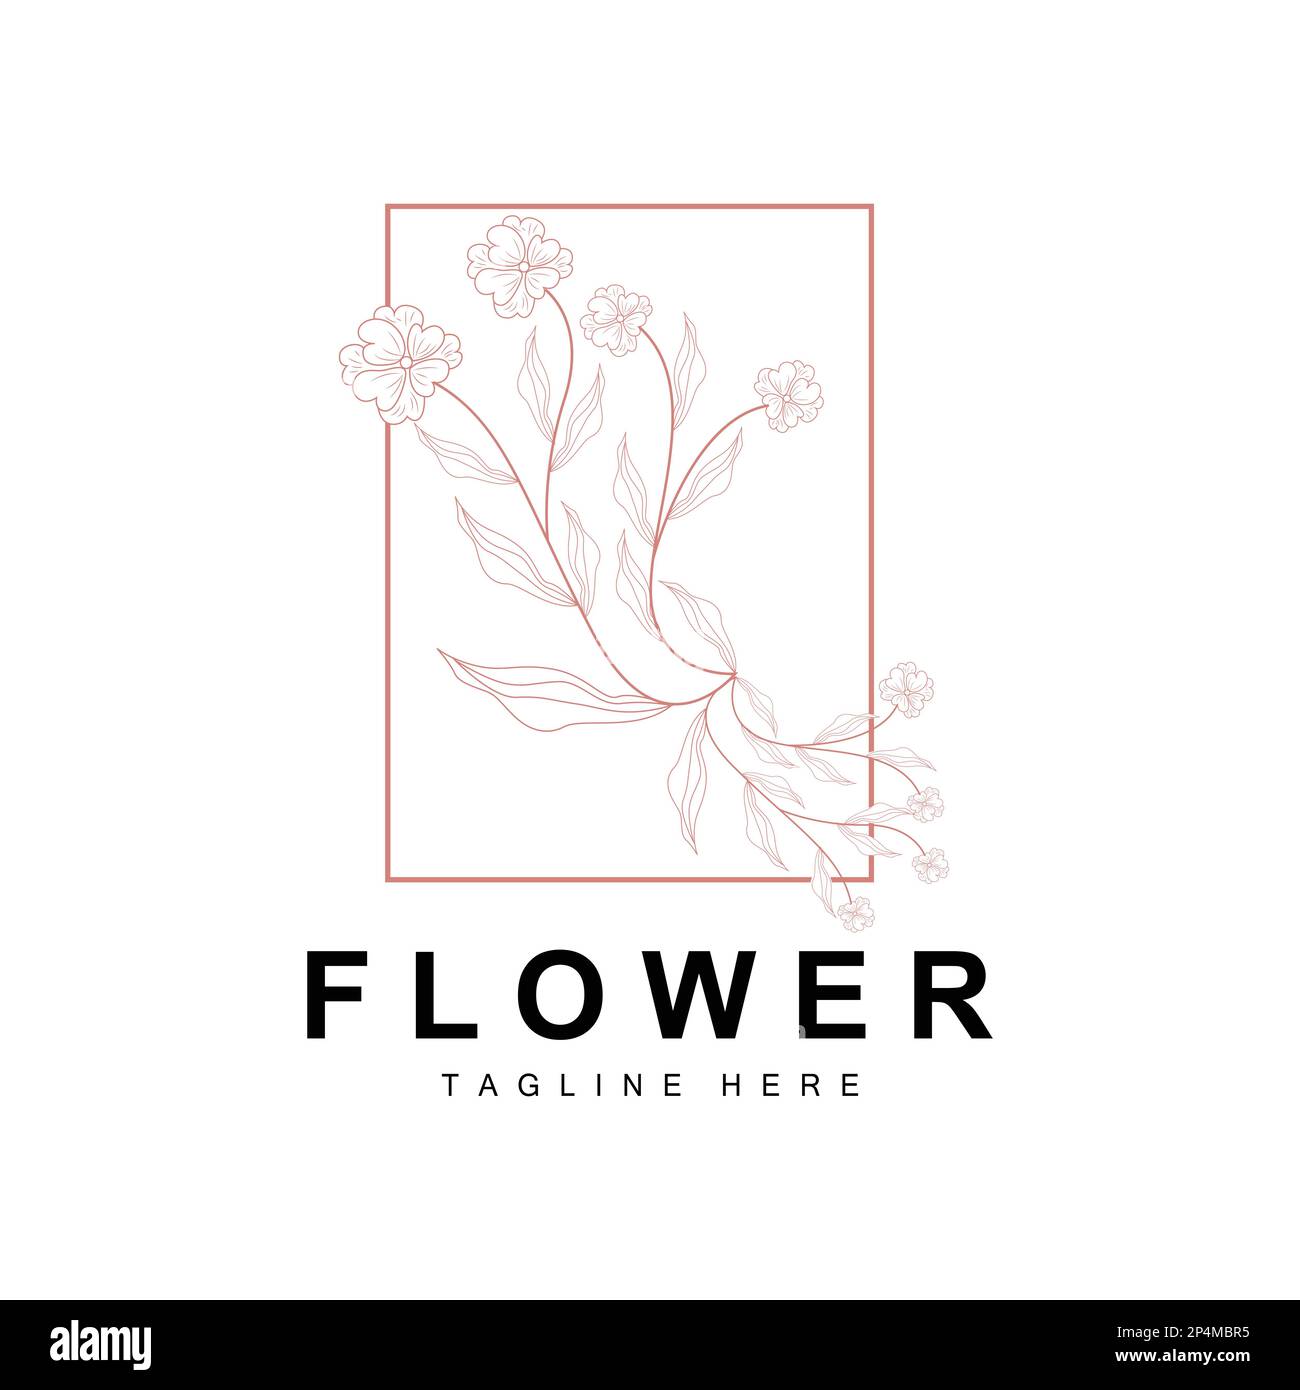 Floral Logo, Leaves And Flowers Botanical Garden Vector, Floral Design Of Life Stock Vector